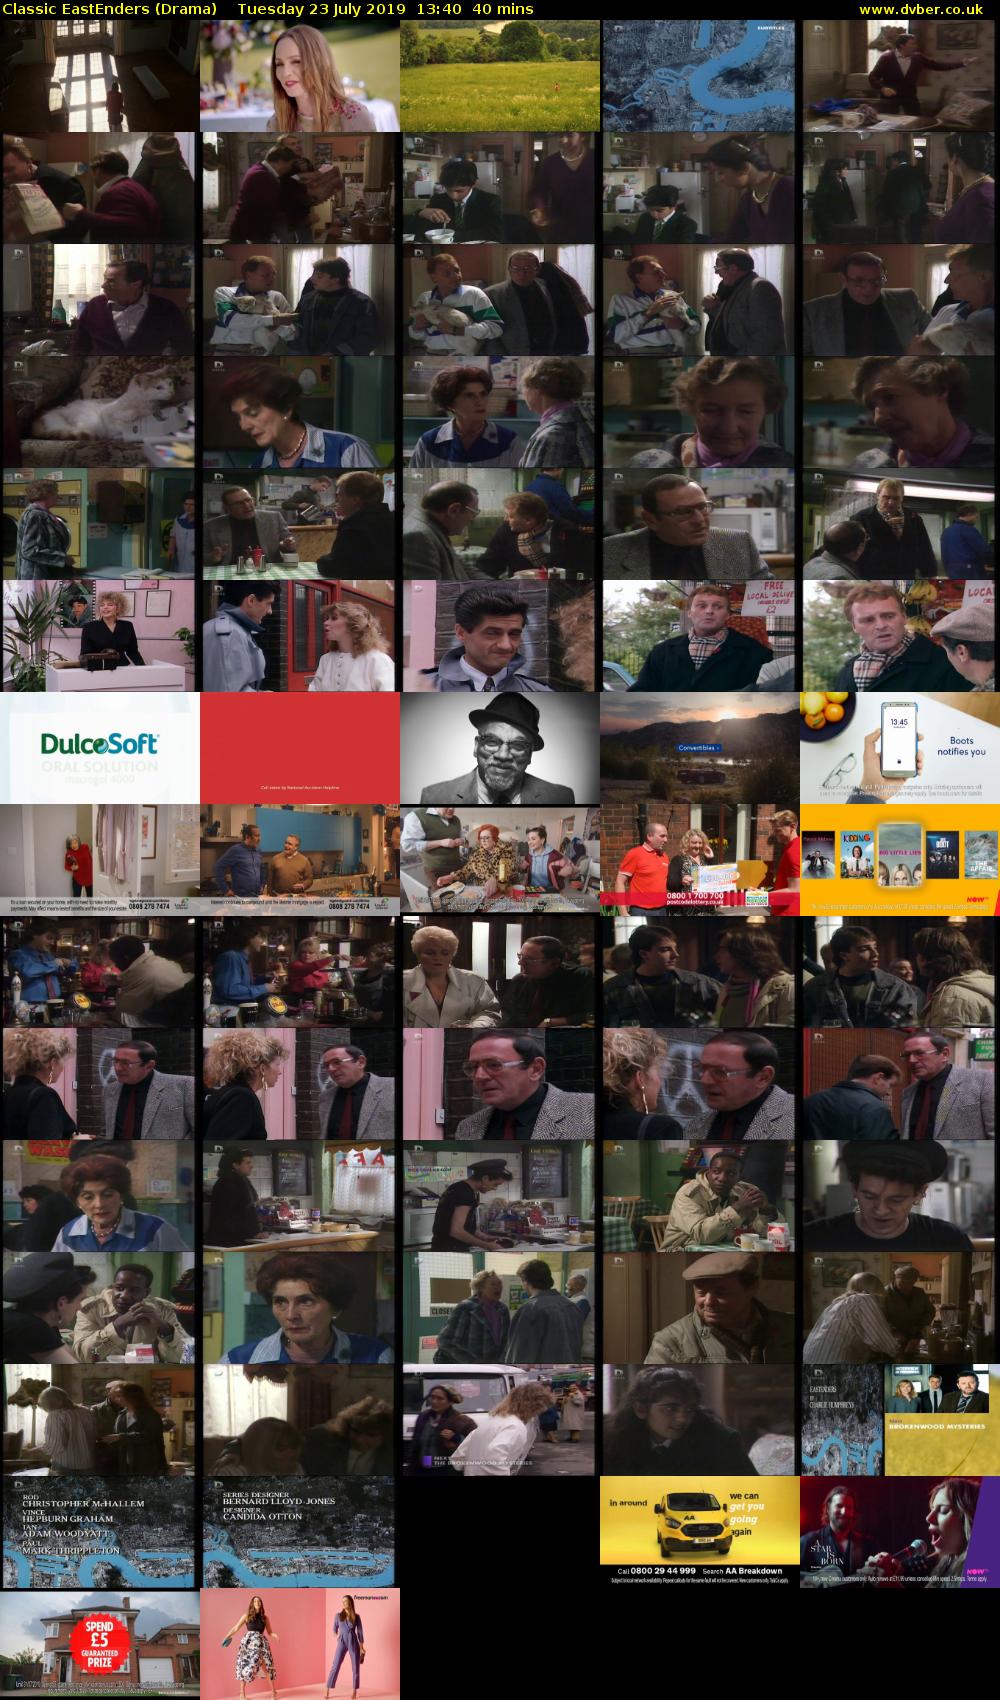 Classic EastEnders (Drama) Tuesday 23 July 2019 13:40 - 14:20